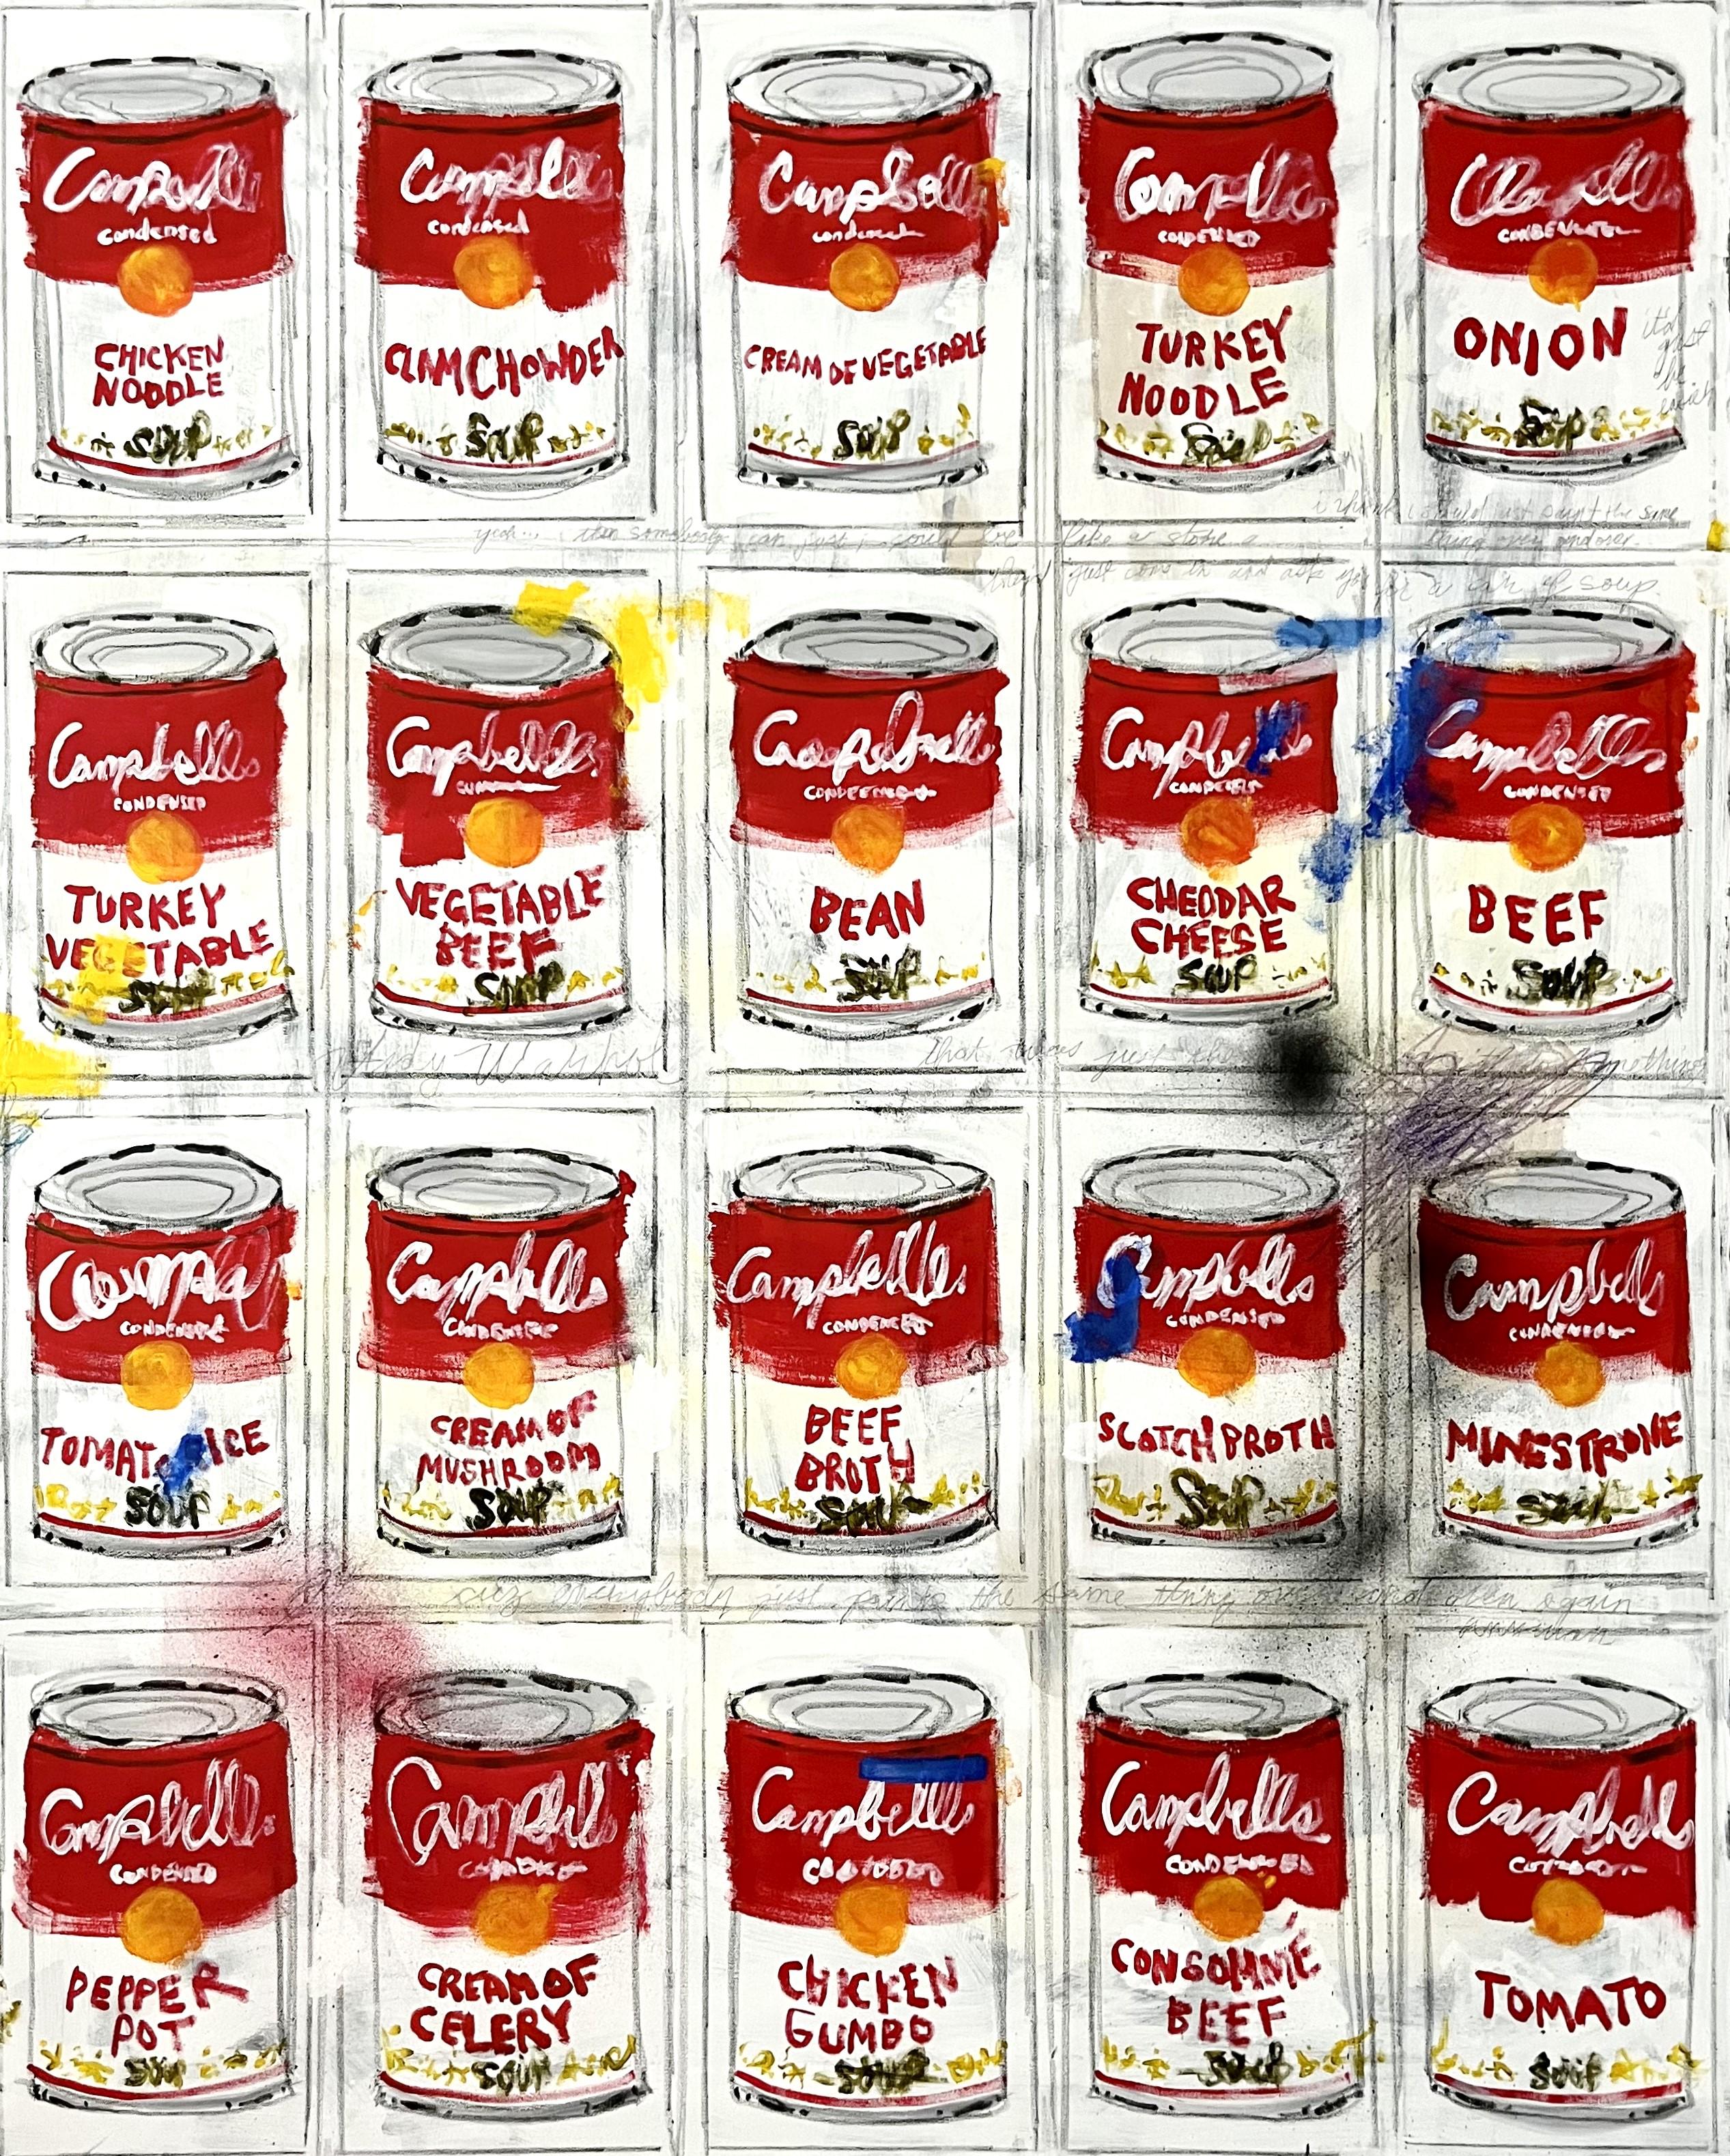 Tyler Casey Abstract Painting - "20 Cans" Contemporary Abstract Andy Warhol Inspired Pop Art Painting